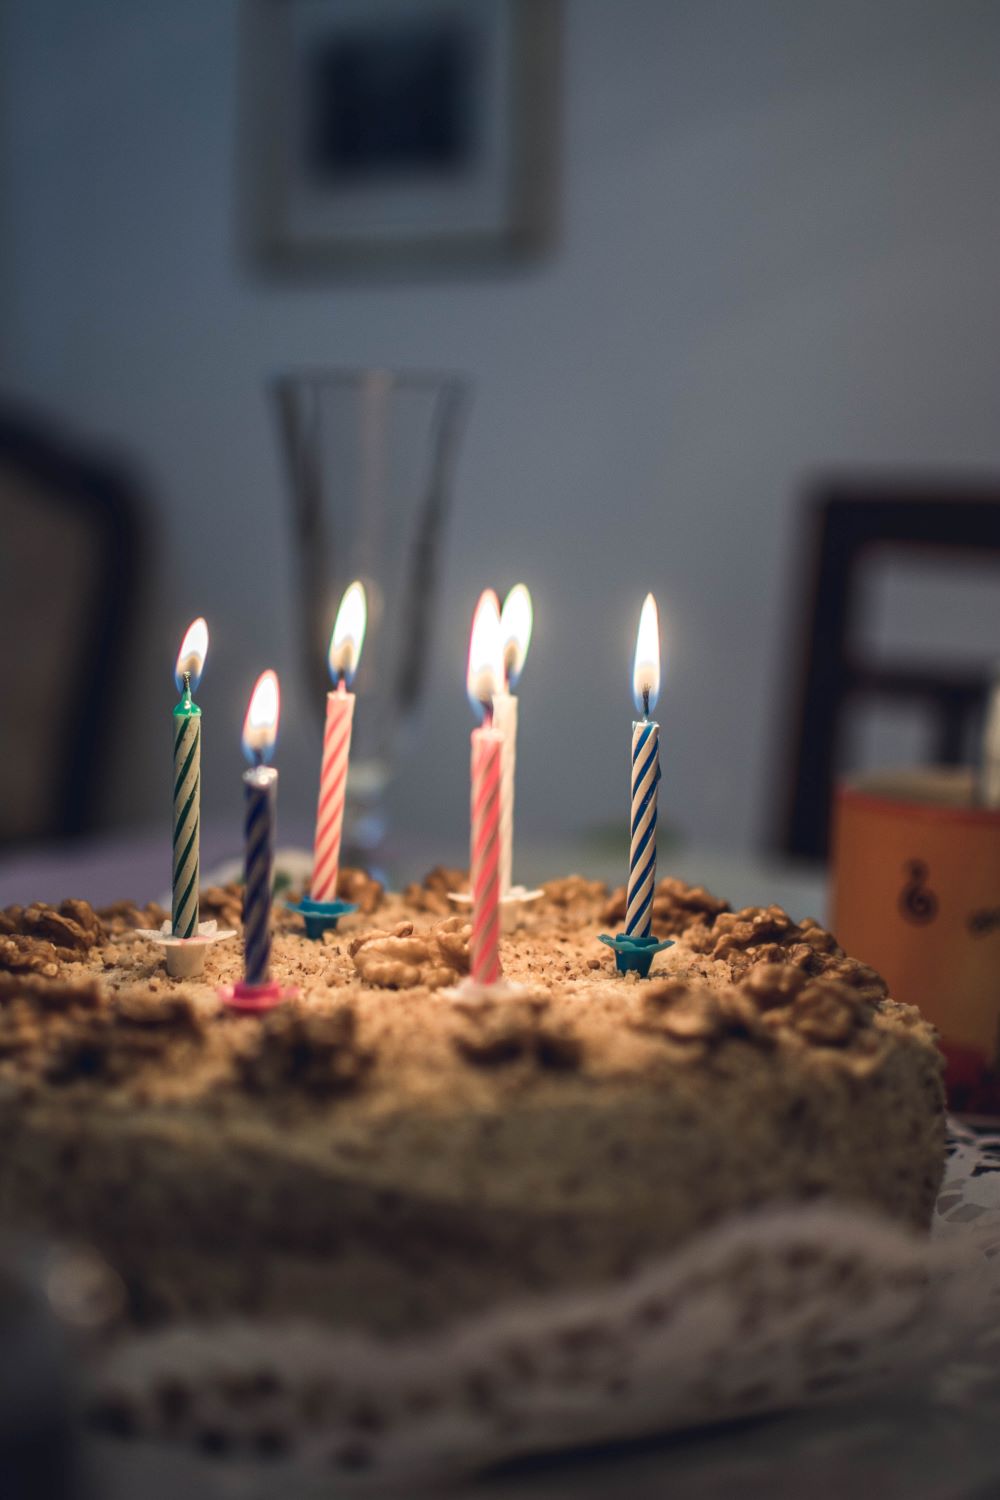 The ways we celebrate your birthday after you die